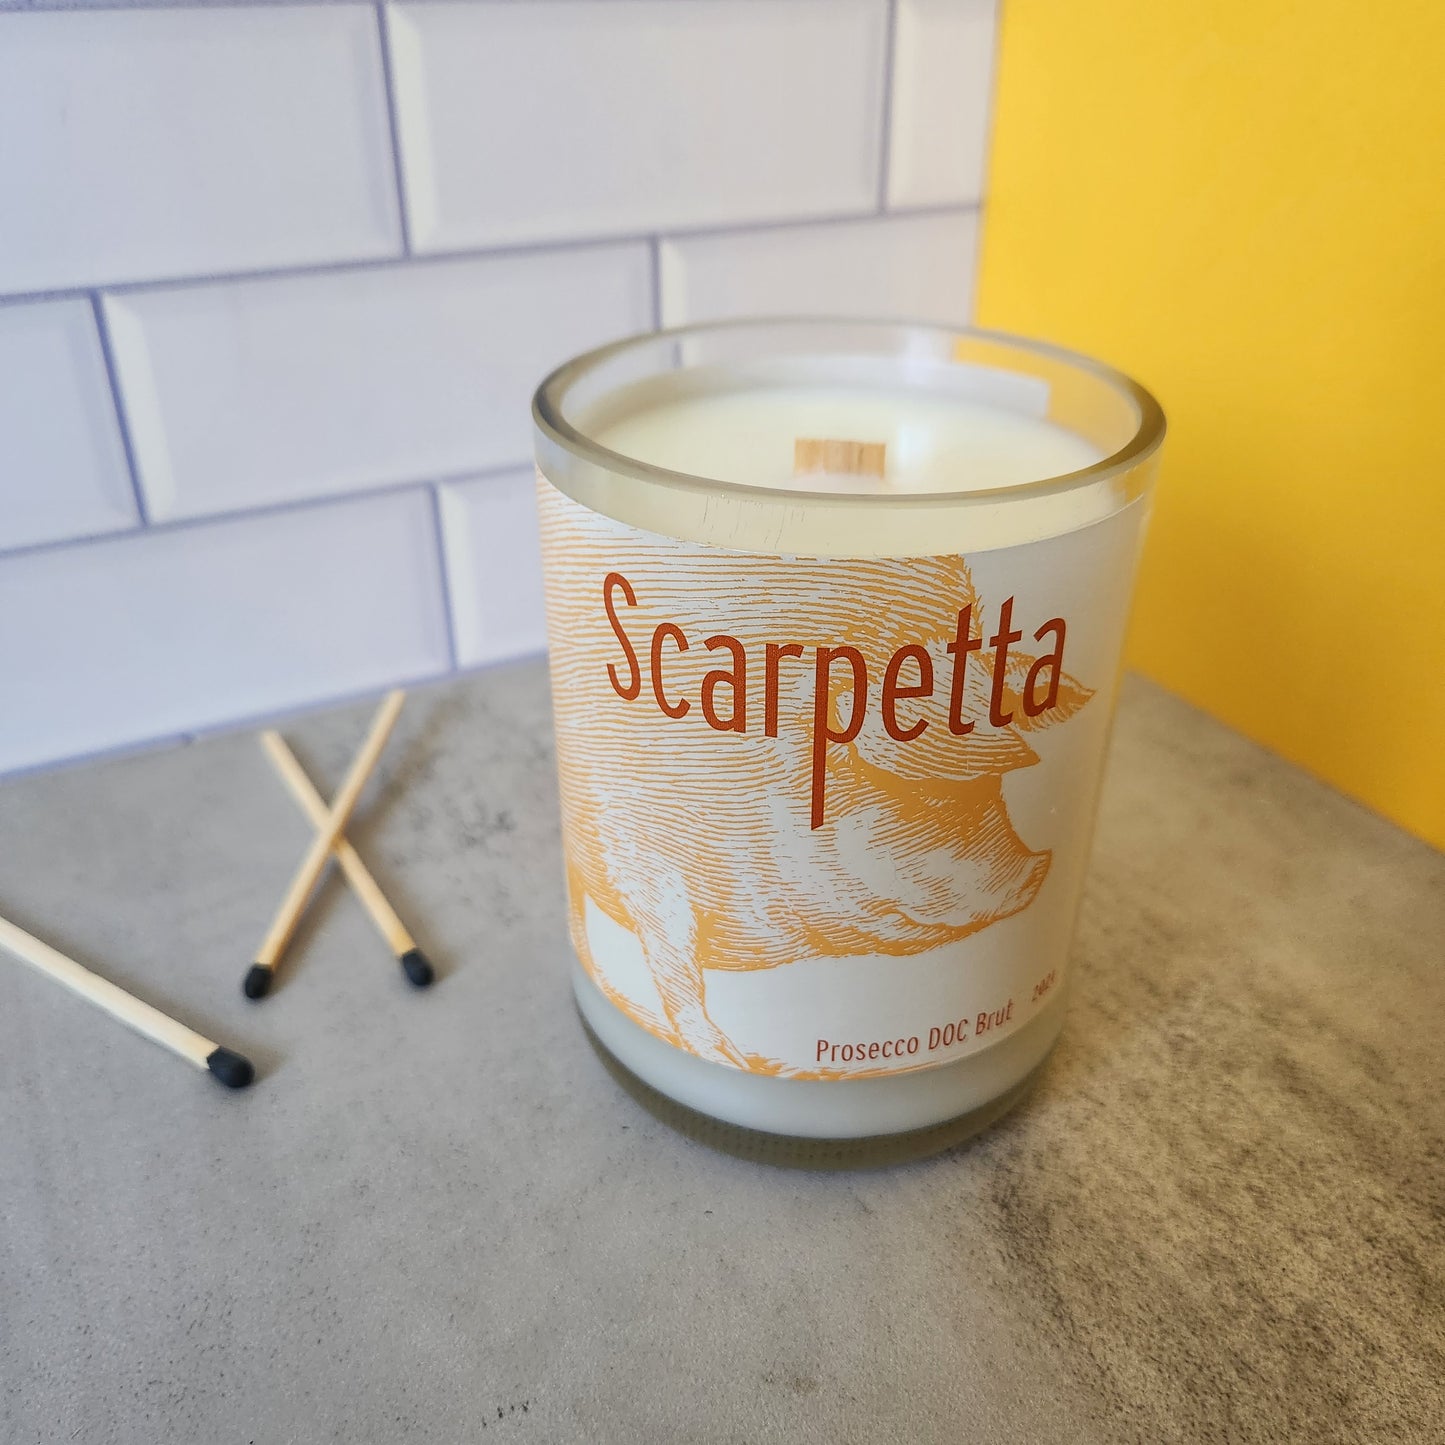 Succulent Garden" Scented Candle in a Recycled "Scarpetta Prosecco" Wine Bottle